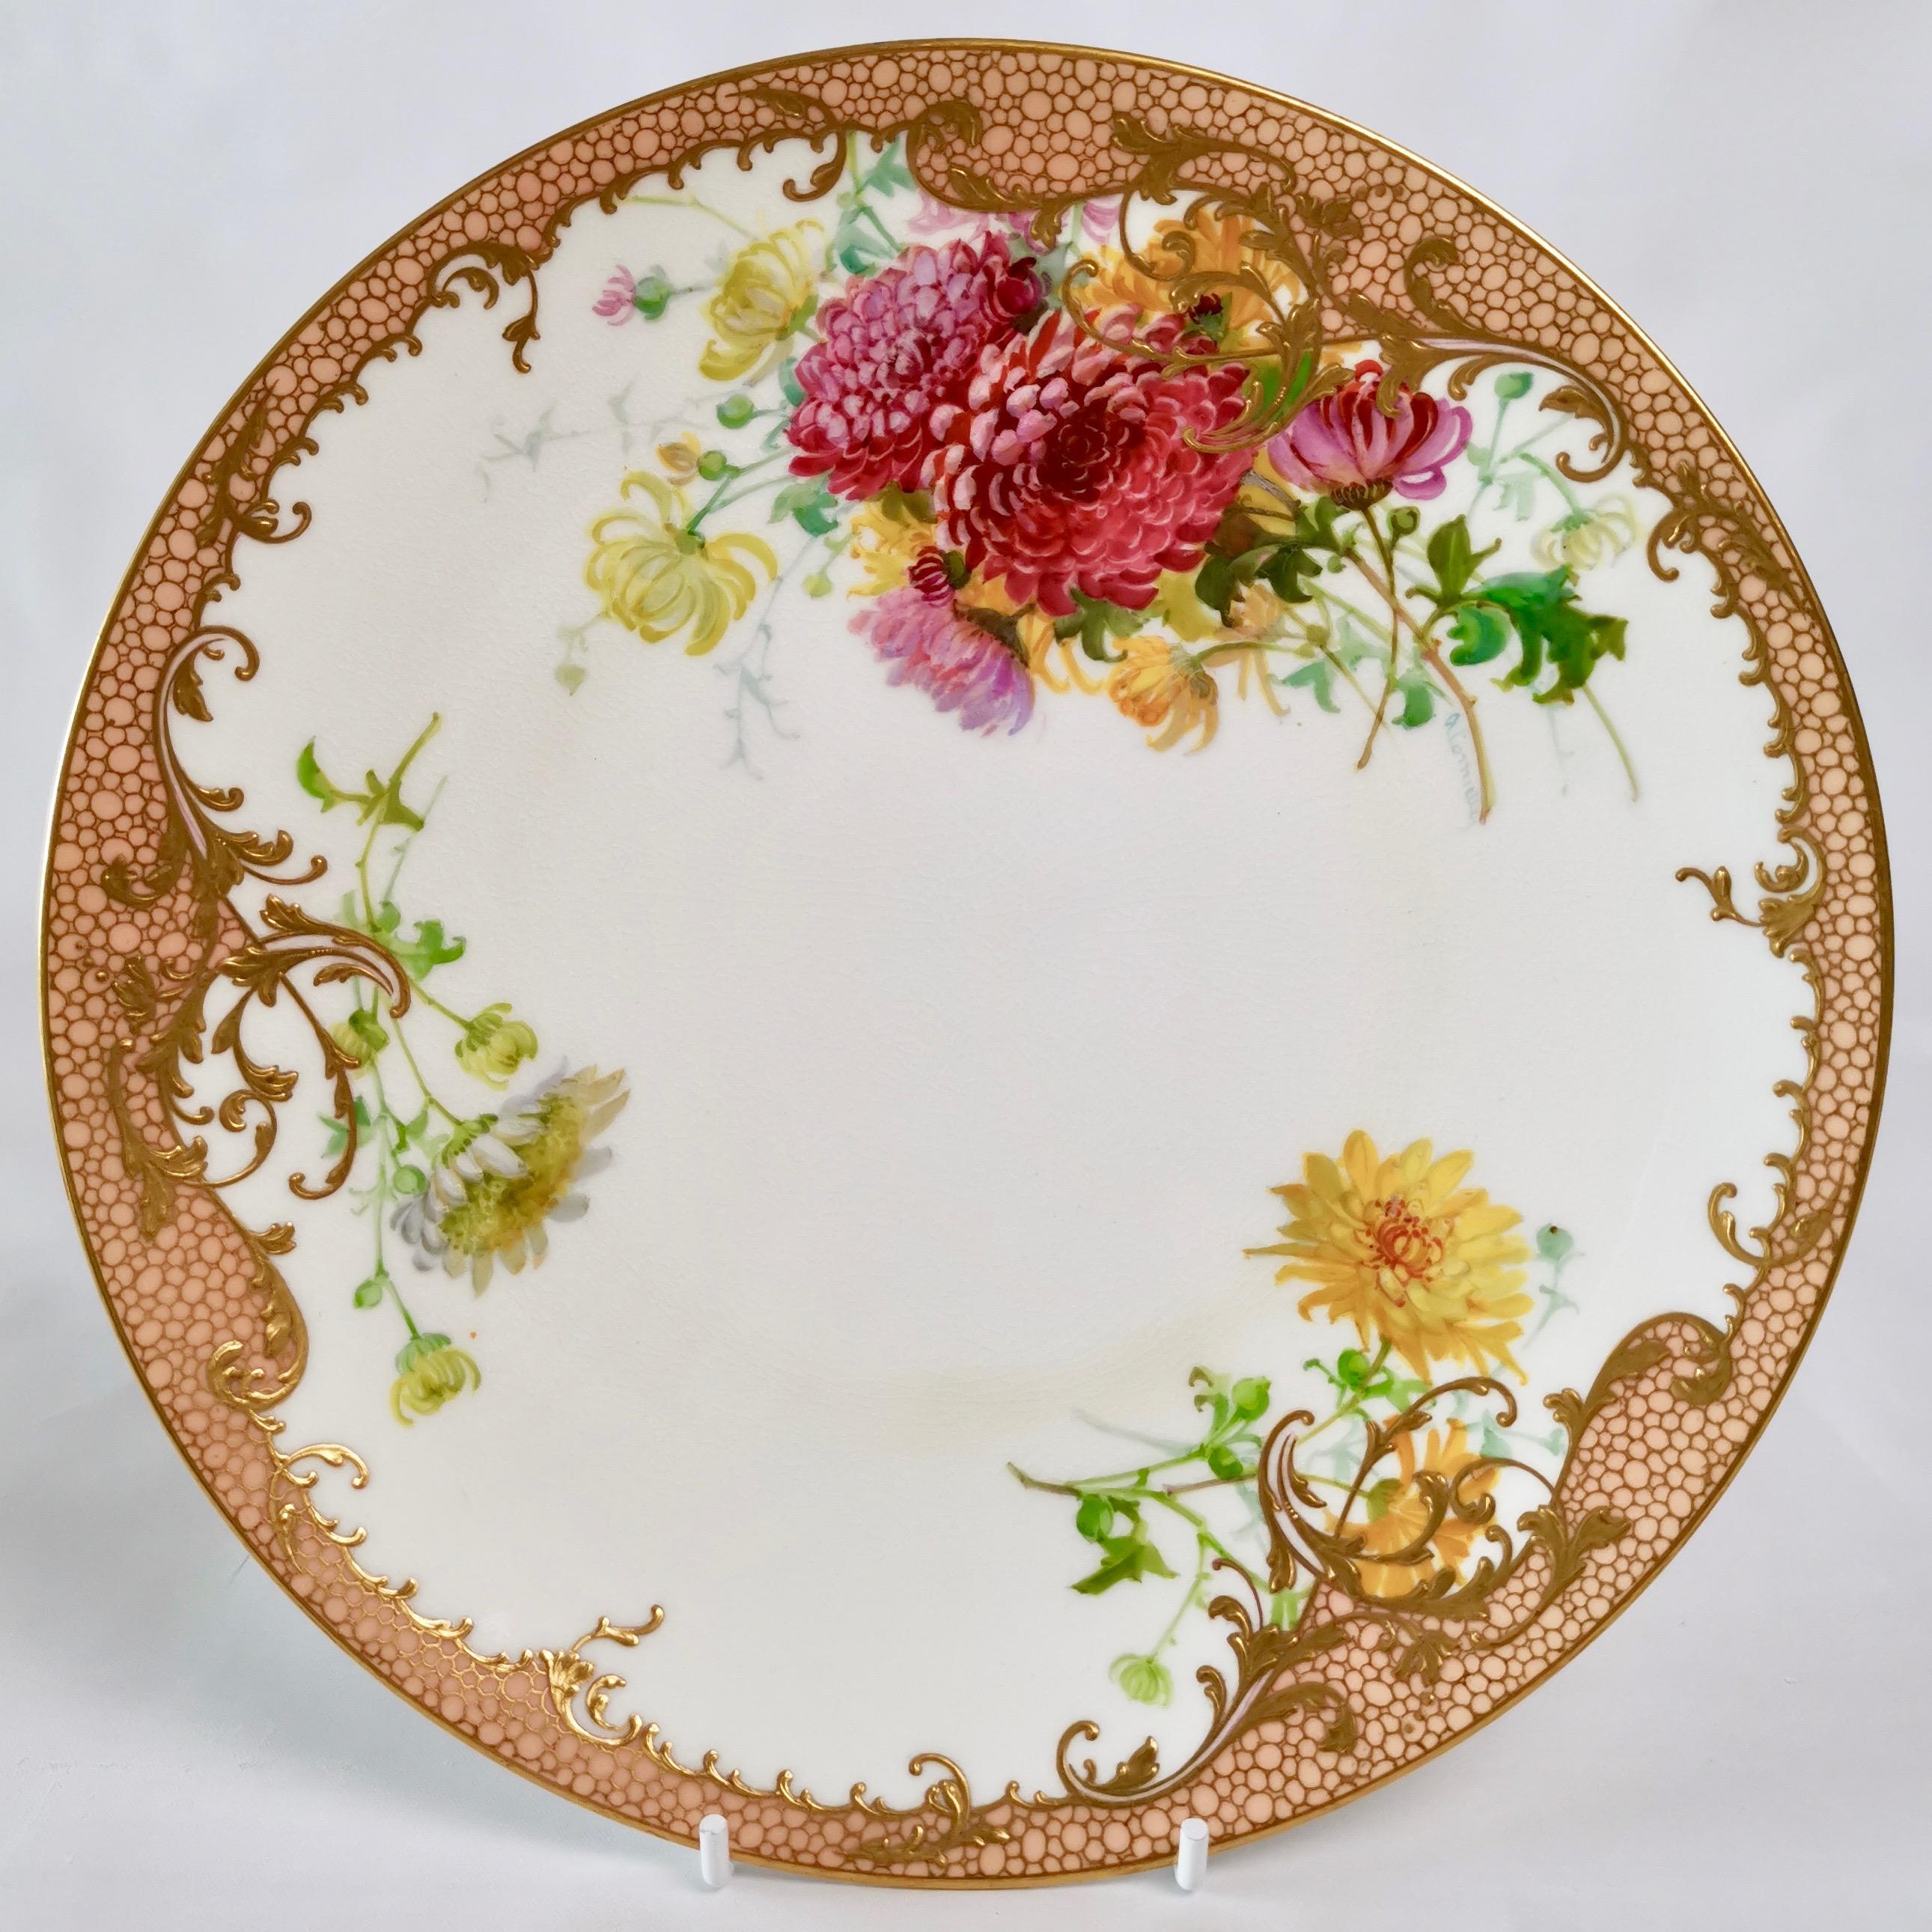 Hand-Painted Minton Dessert Service, Signed by Anton Connelly, circa 1894